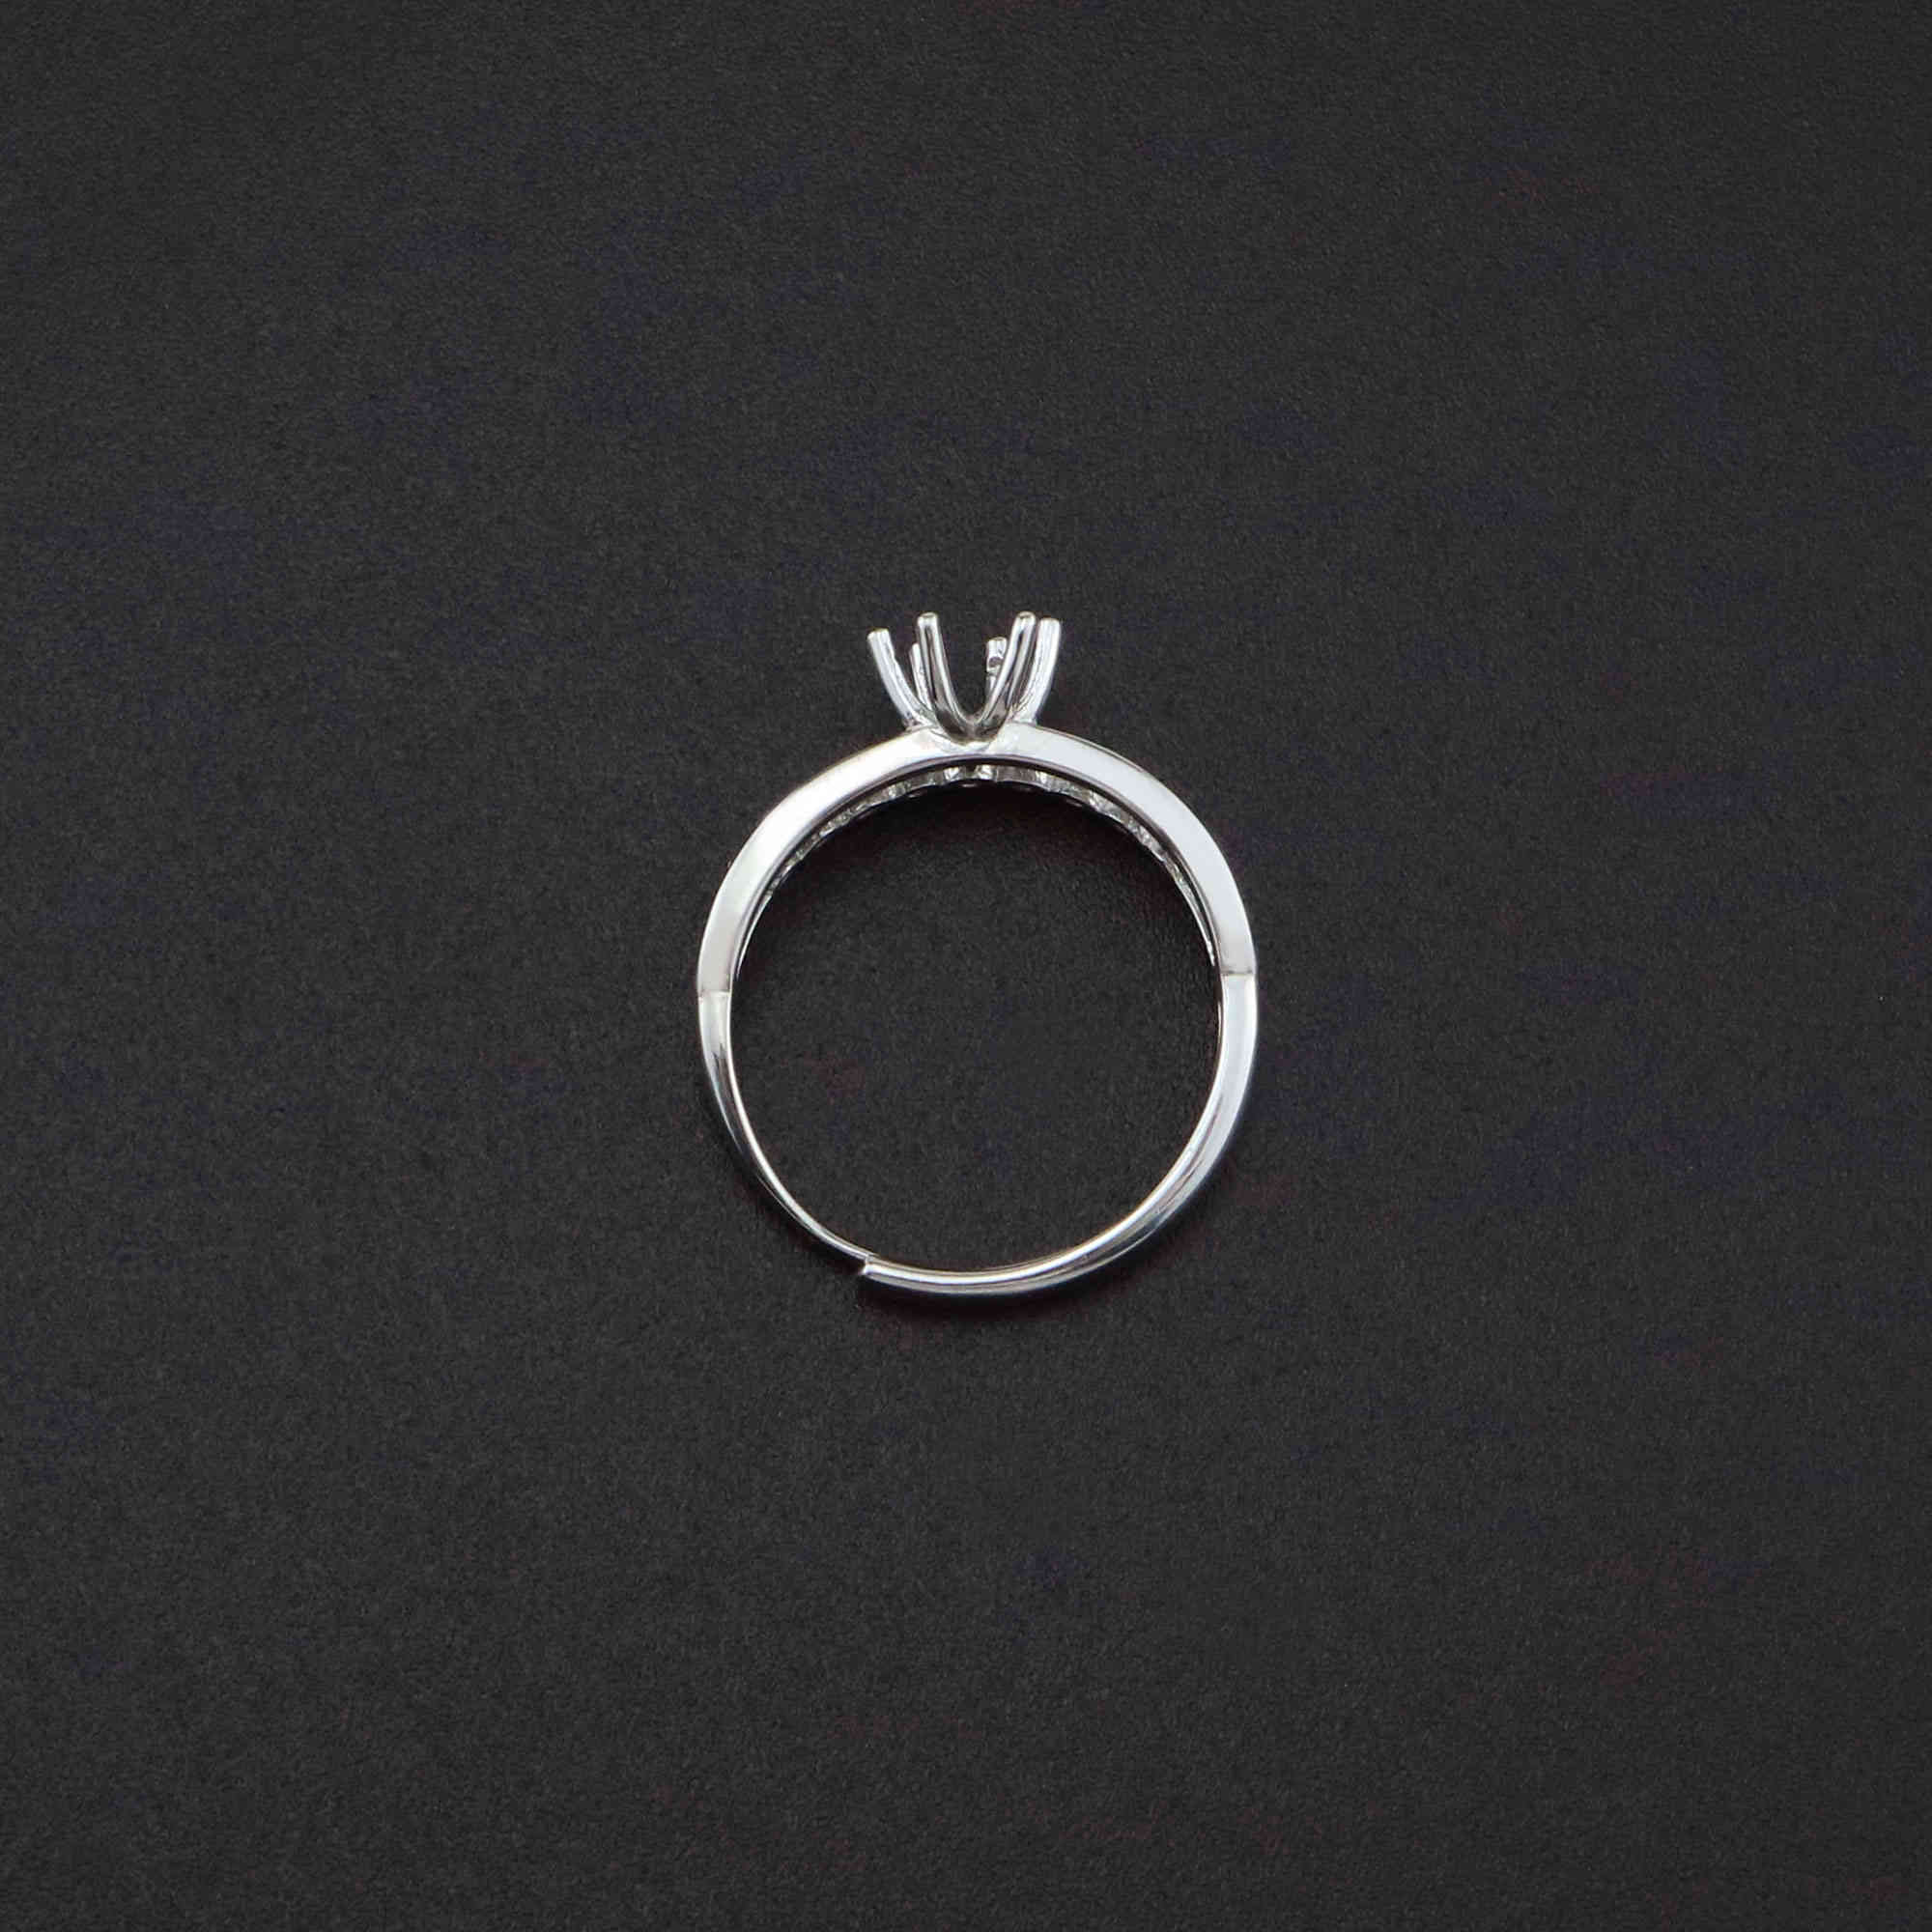 1Pcs 6MM Round Prong Bezel Solid 925 Sterling Silver Adjustable Ring Settings for Moissanite Gemstone DIY Supplies 1212055 - Click Image to Close